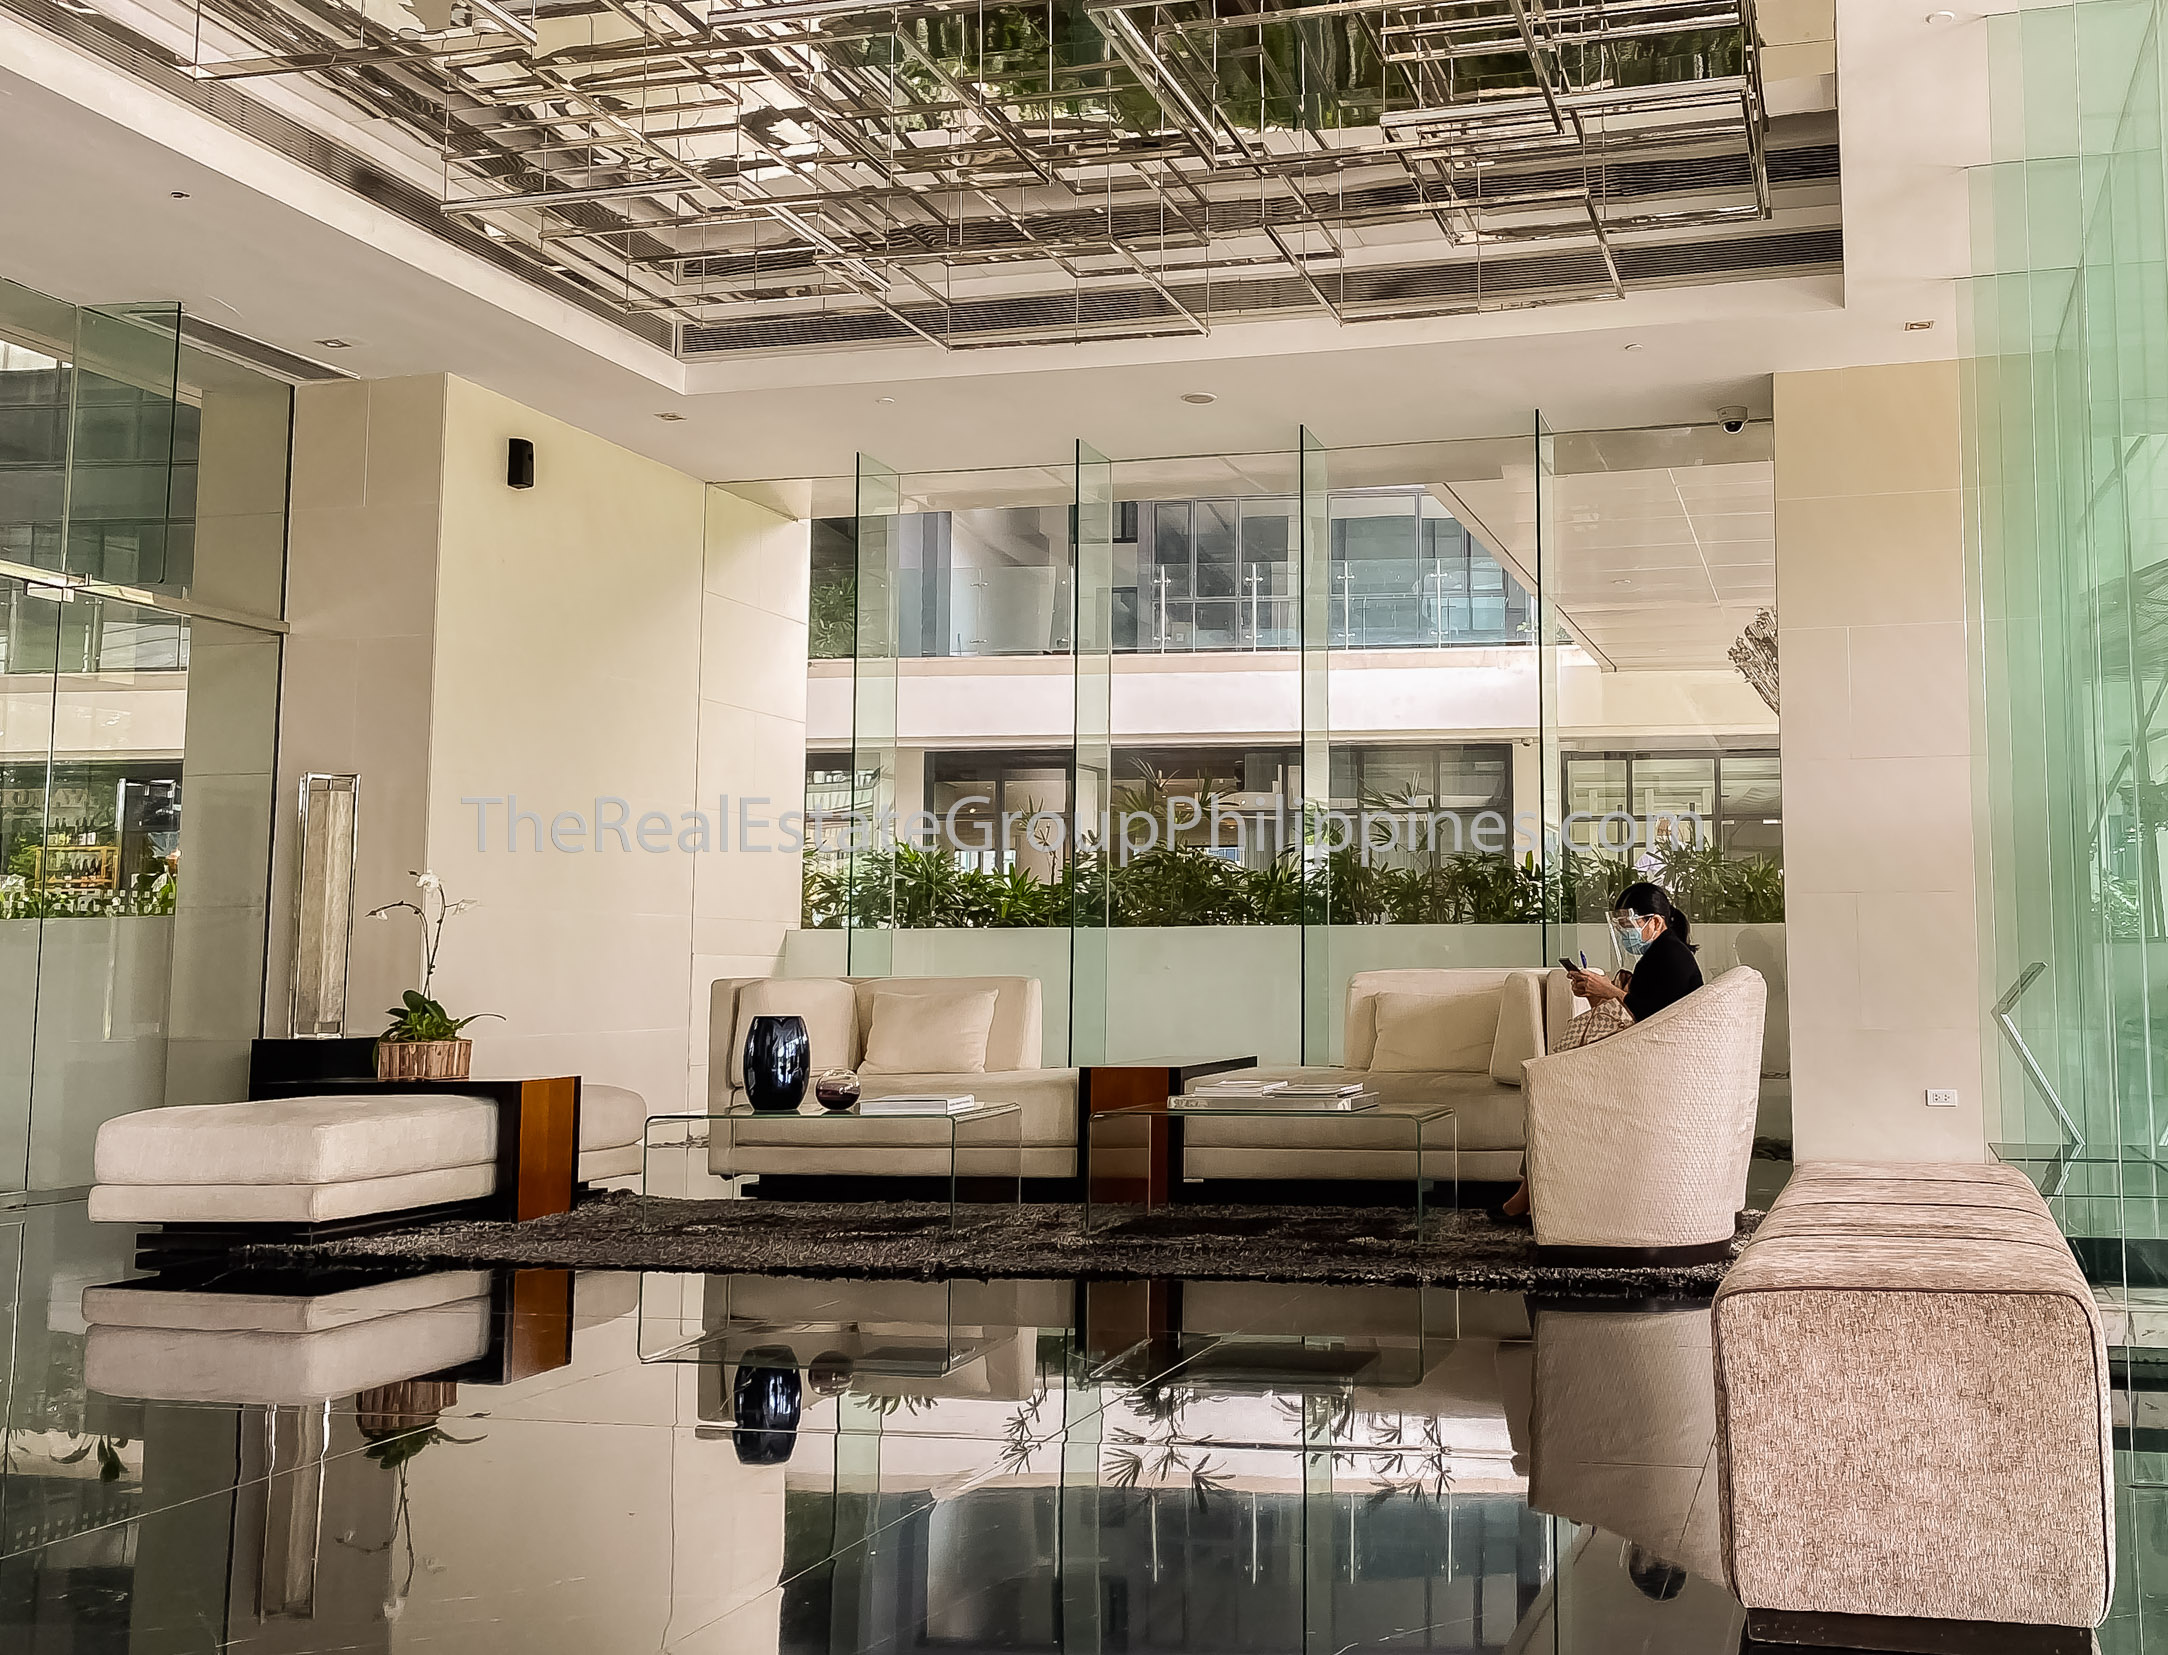 1BR Condo For Rent, Arya Residences, Tower 1, BGC - ₱75K Per Month-12